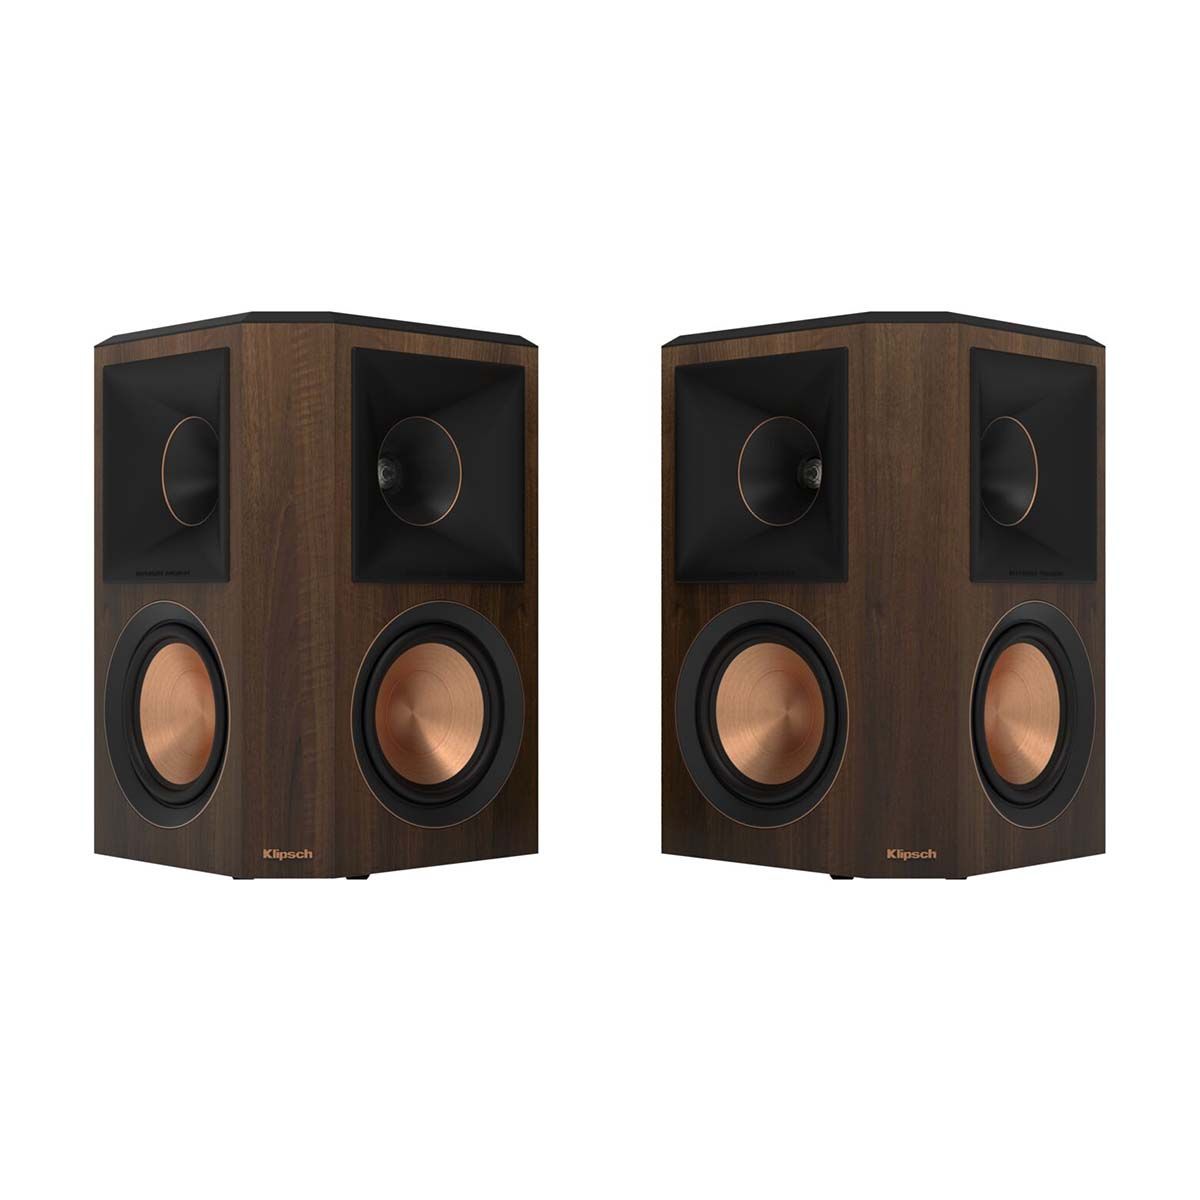 Klipsch RP-502S II Surround Speakers - Walnut - front view of pair without grills